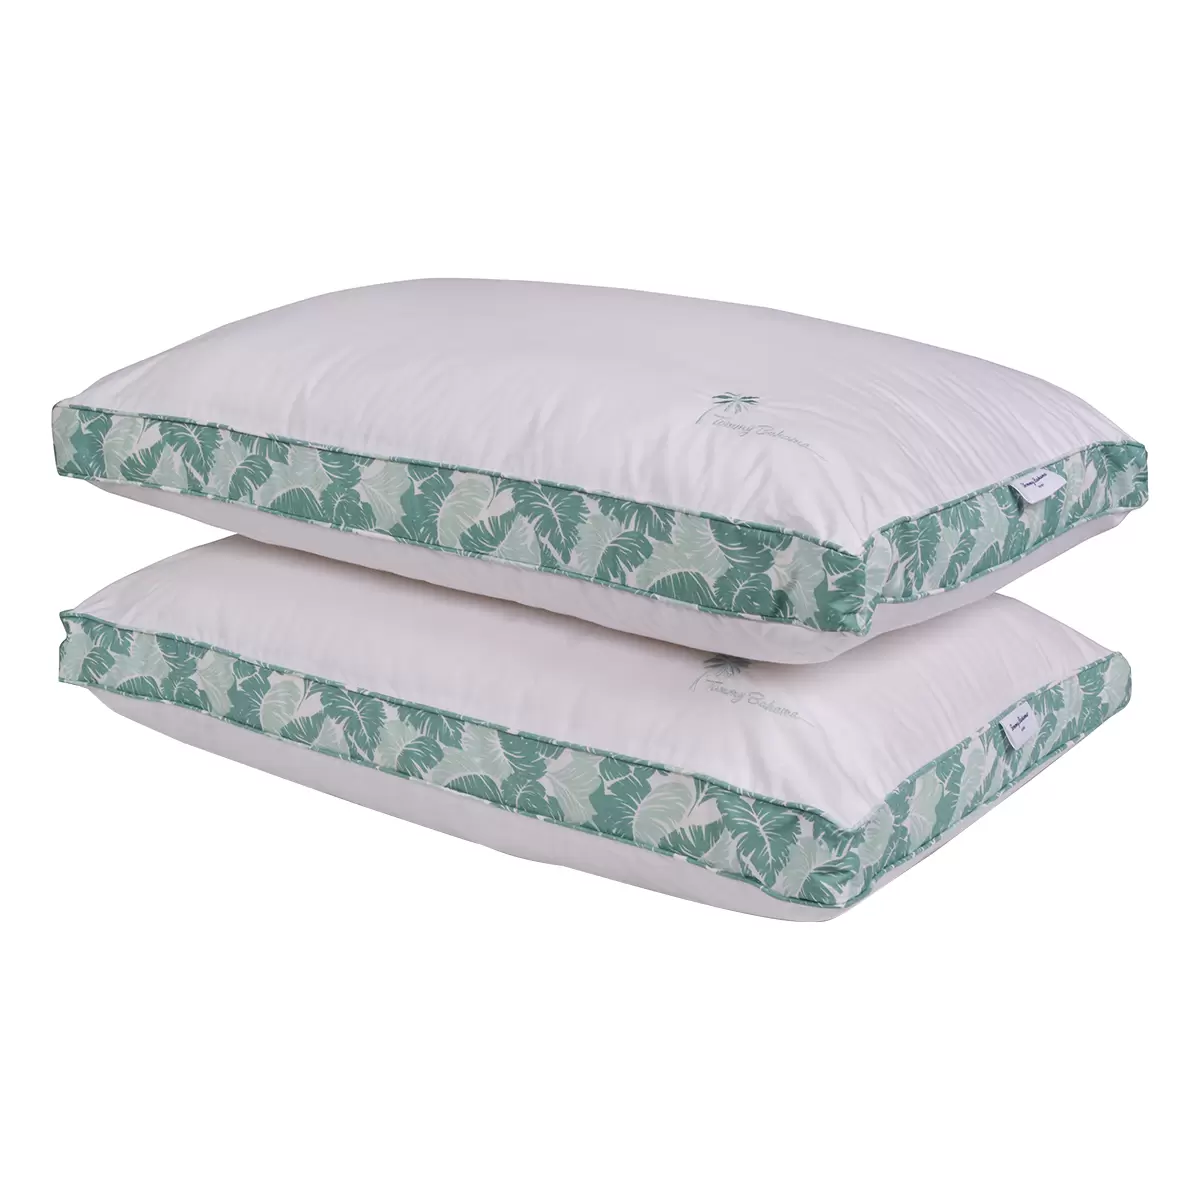 Tommy Bahama Down Alternative Pillows 2 Pack